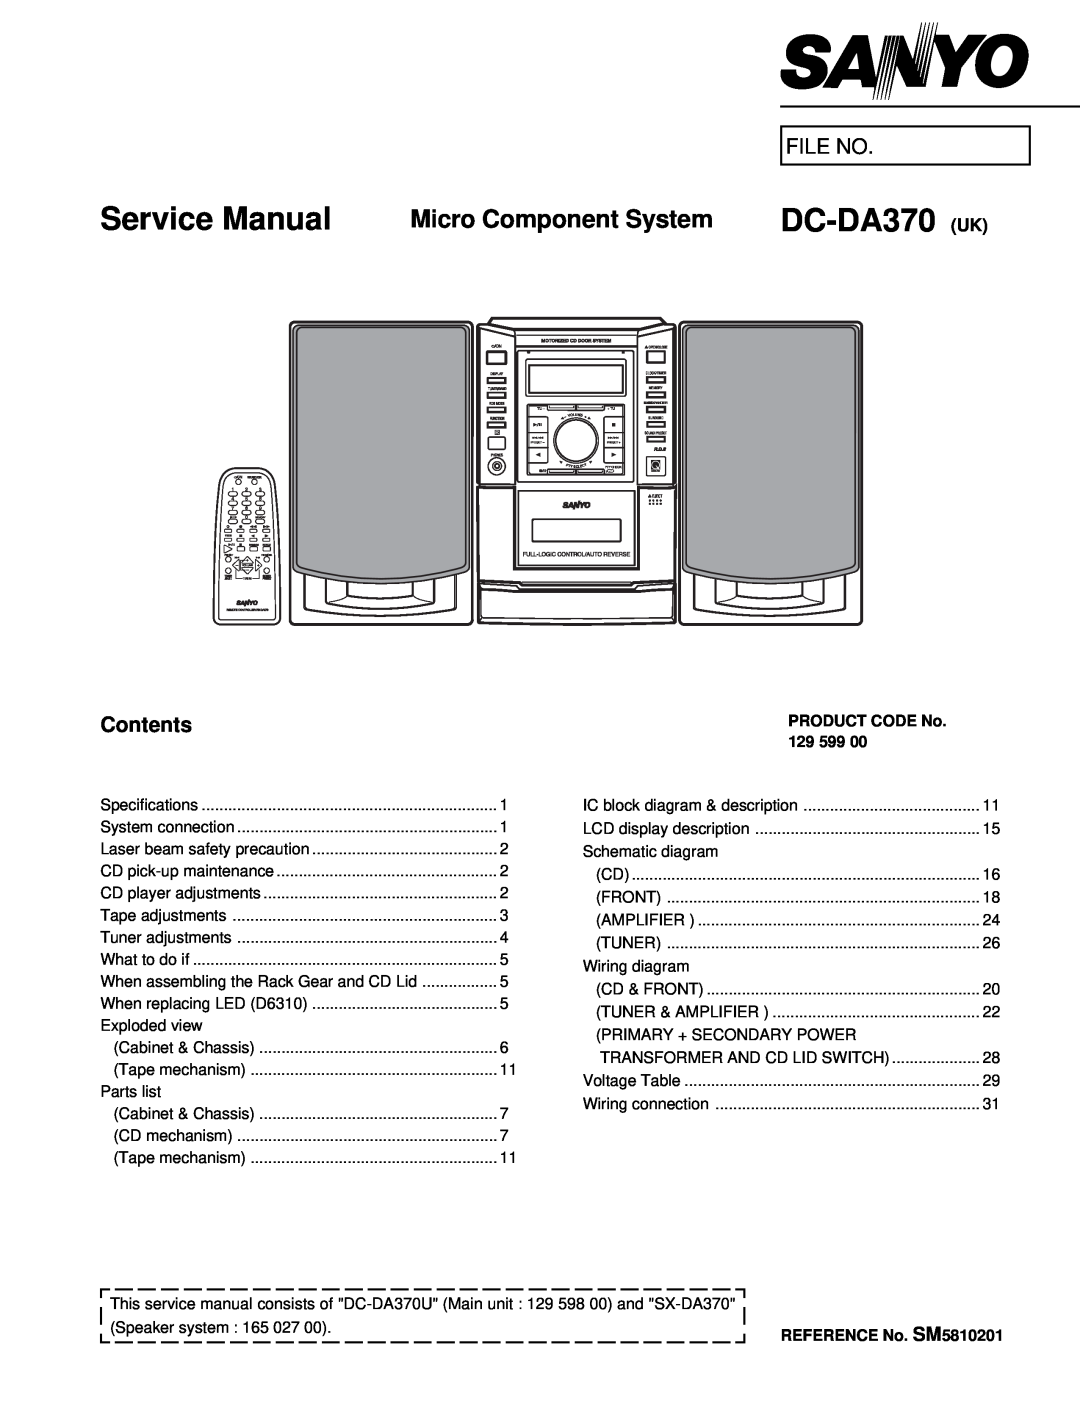 Sanyo service manual File No, Contents, DC-DA370 UK, Micro Component System, PRODUCT CODE No, REFERENCE No 